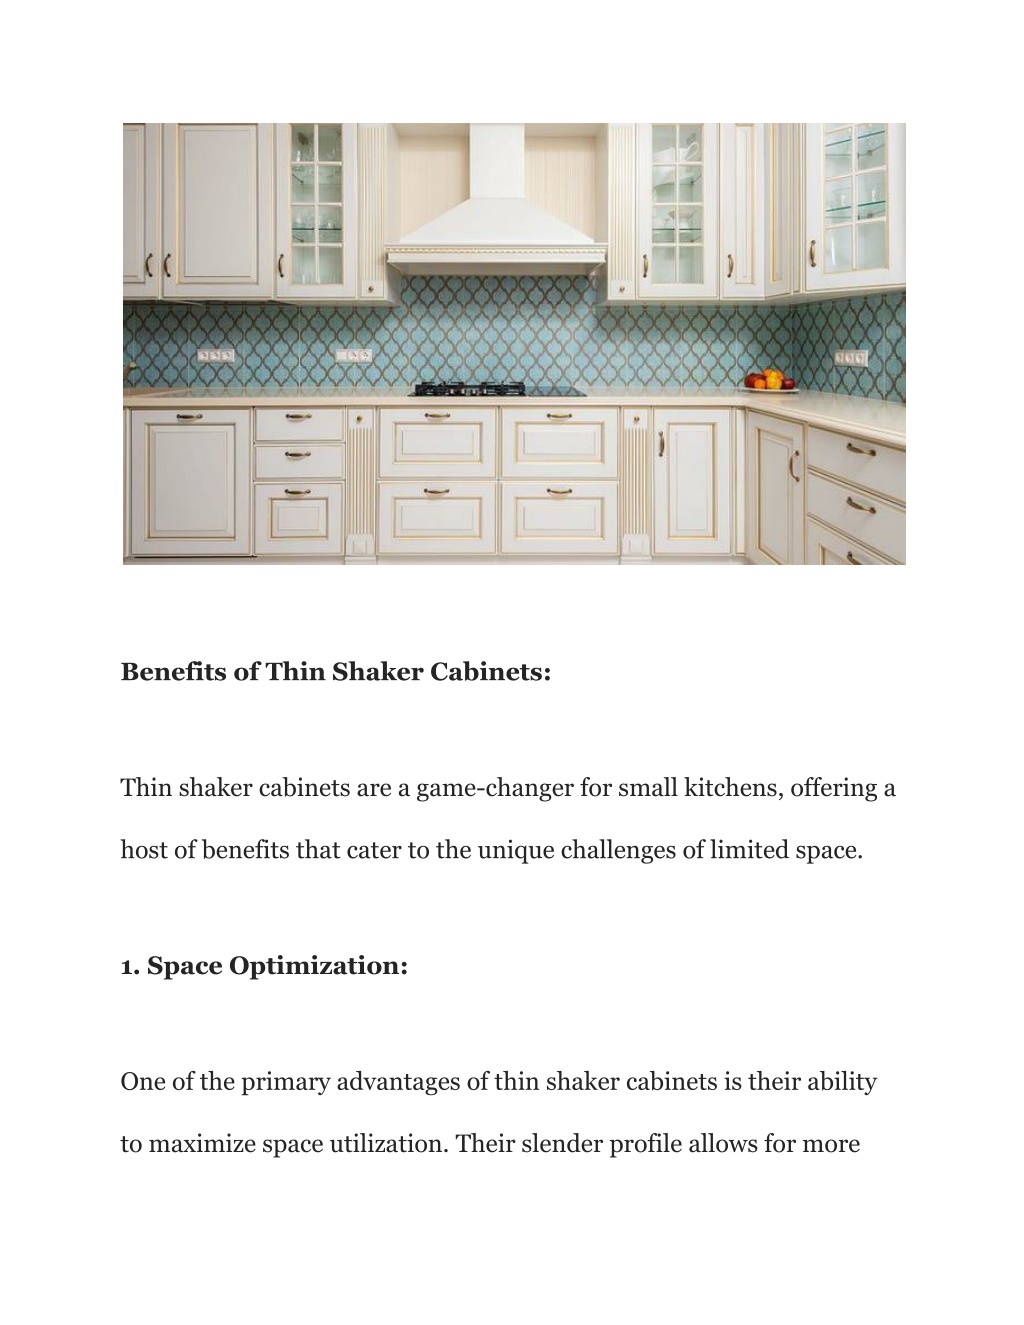 PPT - Sleek and Chic_ Thin Shaker Cabinets for Modern Homes PowerPoint ...